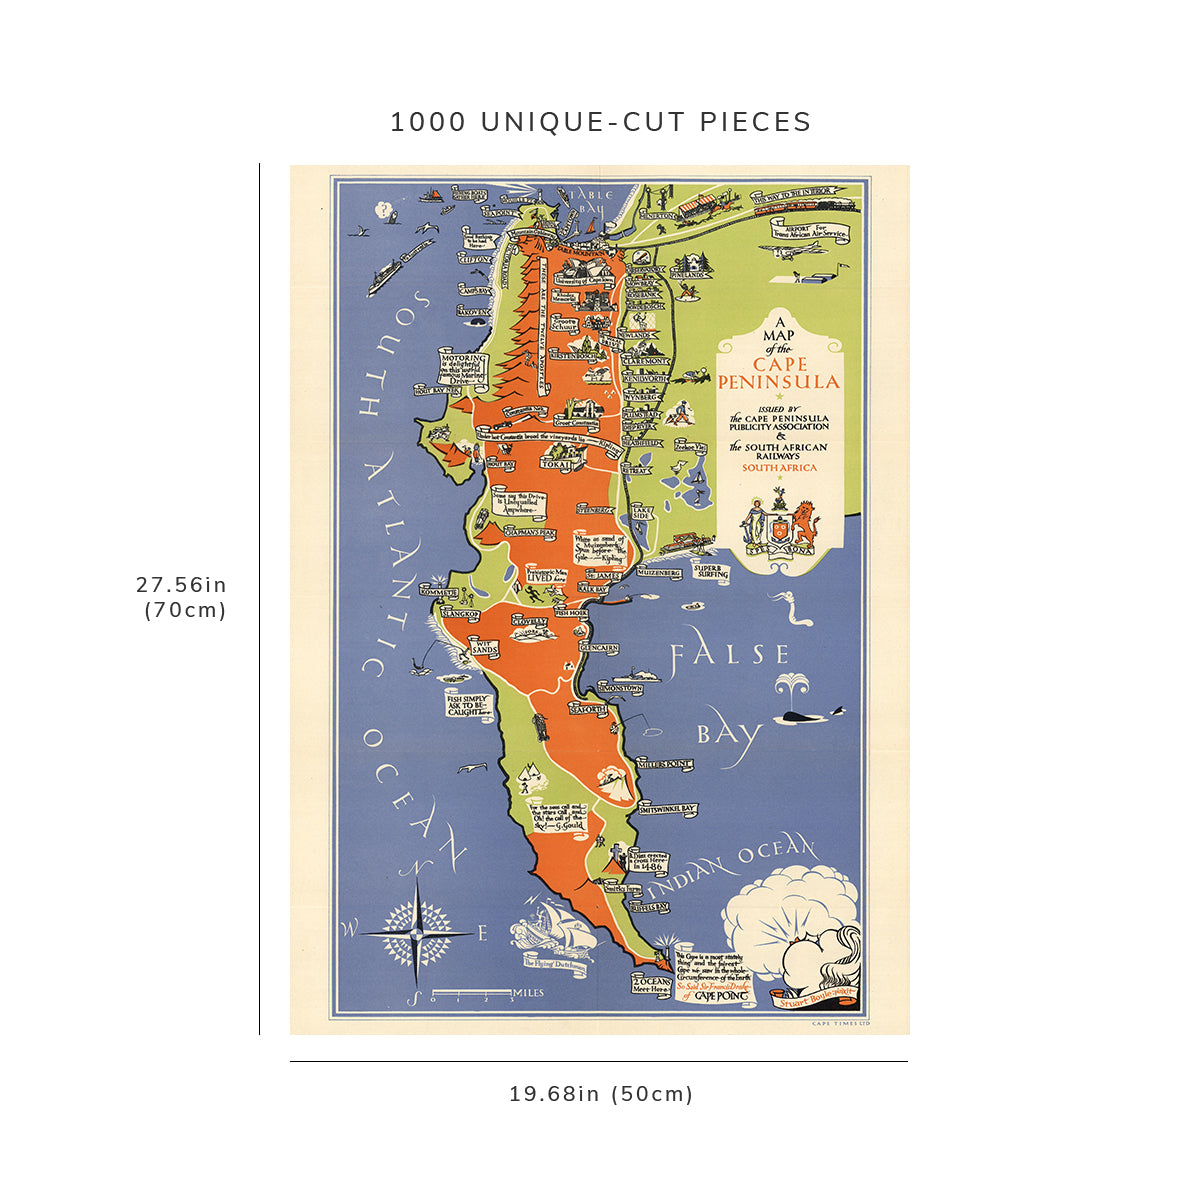 1000 piece puzzle - 1935 Map of Cape Peninsula | Jigsaw Puzzle Game for Adults | Birthday Present Gifts